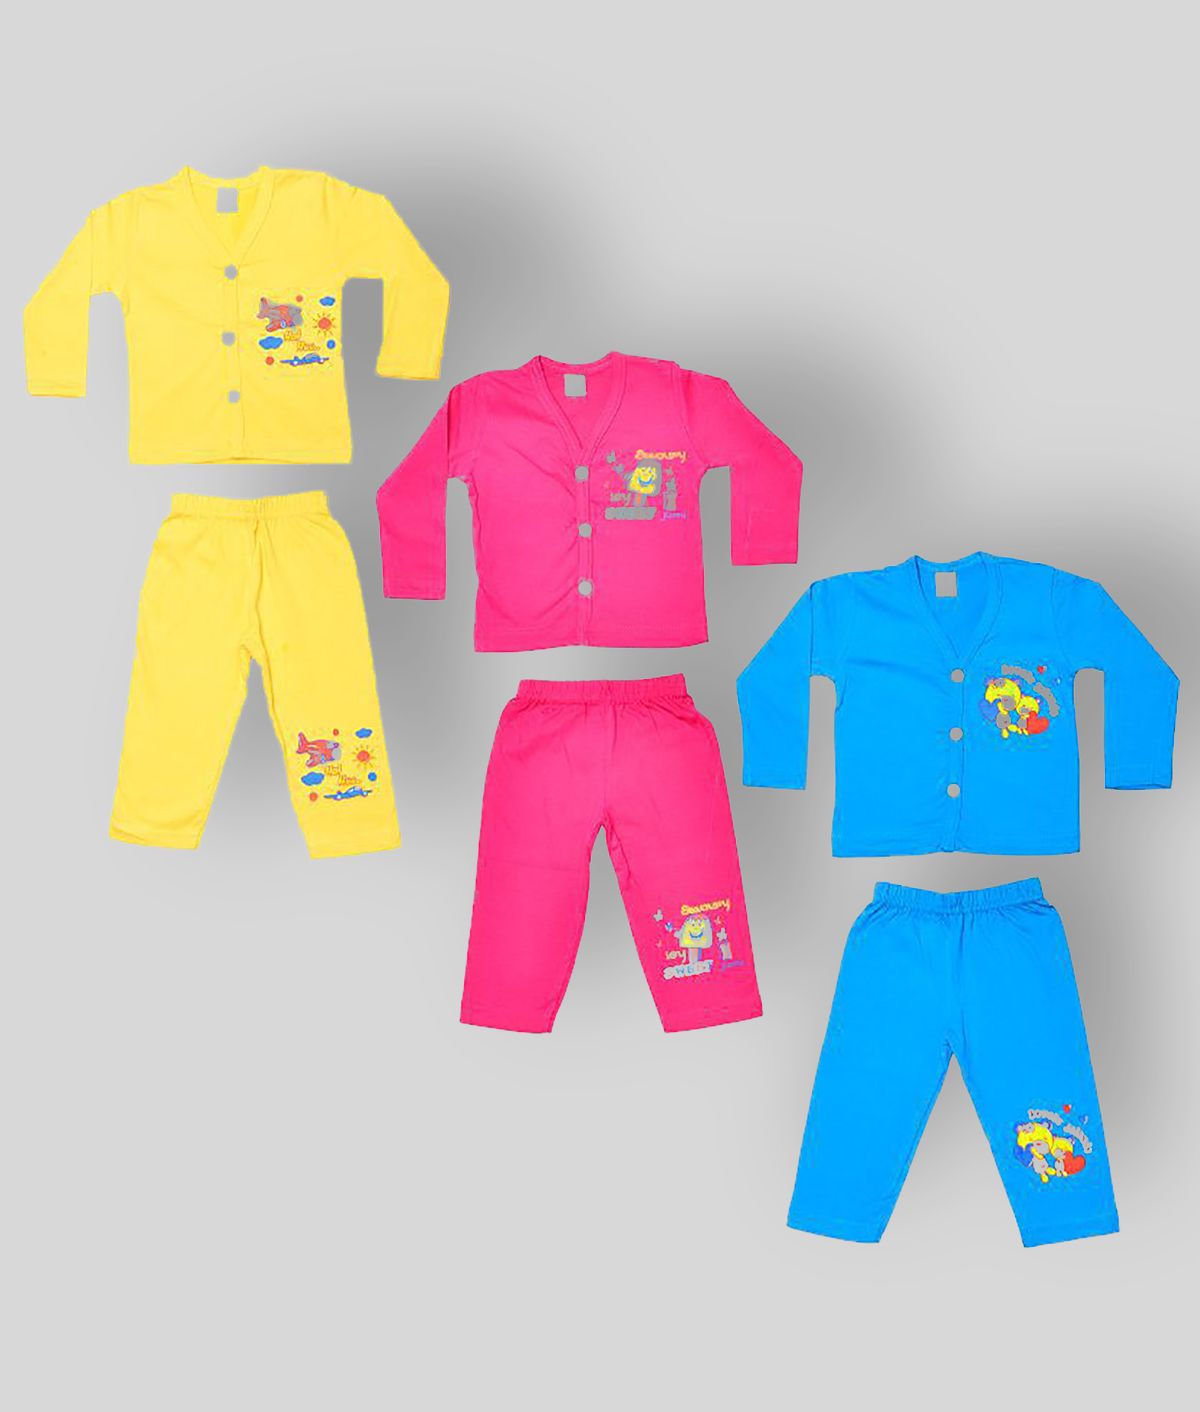 Sathiyas - Multicolor Cotton Blend T-Shirt & Shorts For Baby Boy,Baby Girl ( Pack of 3 )